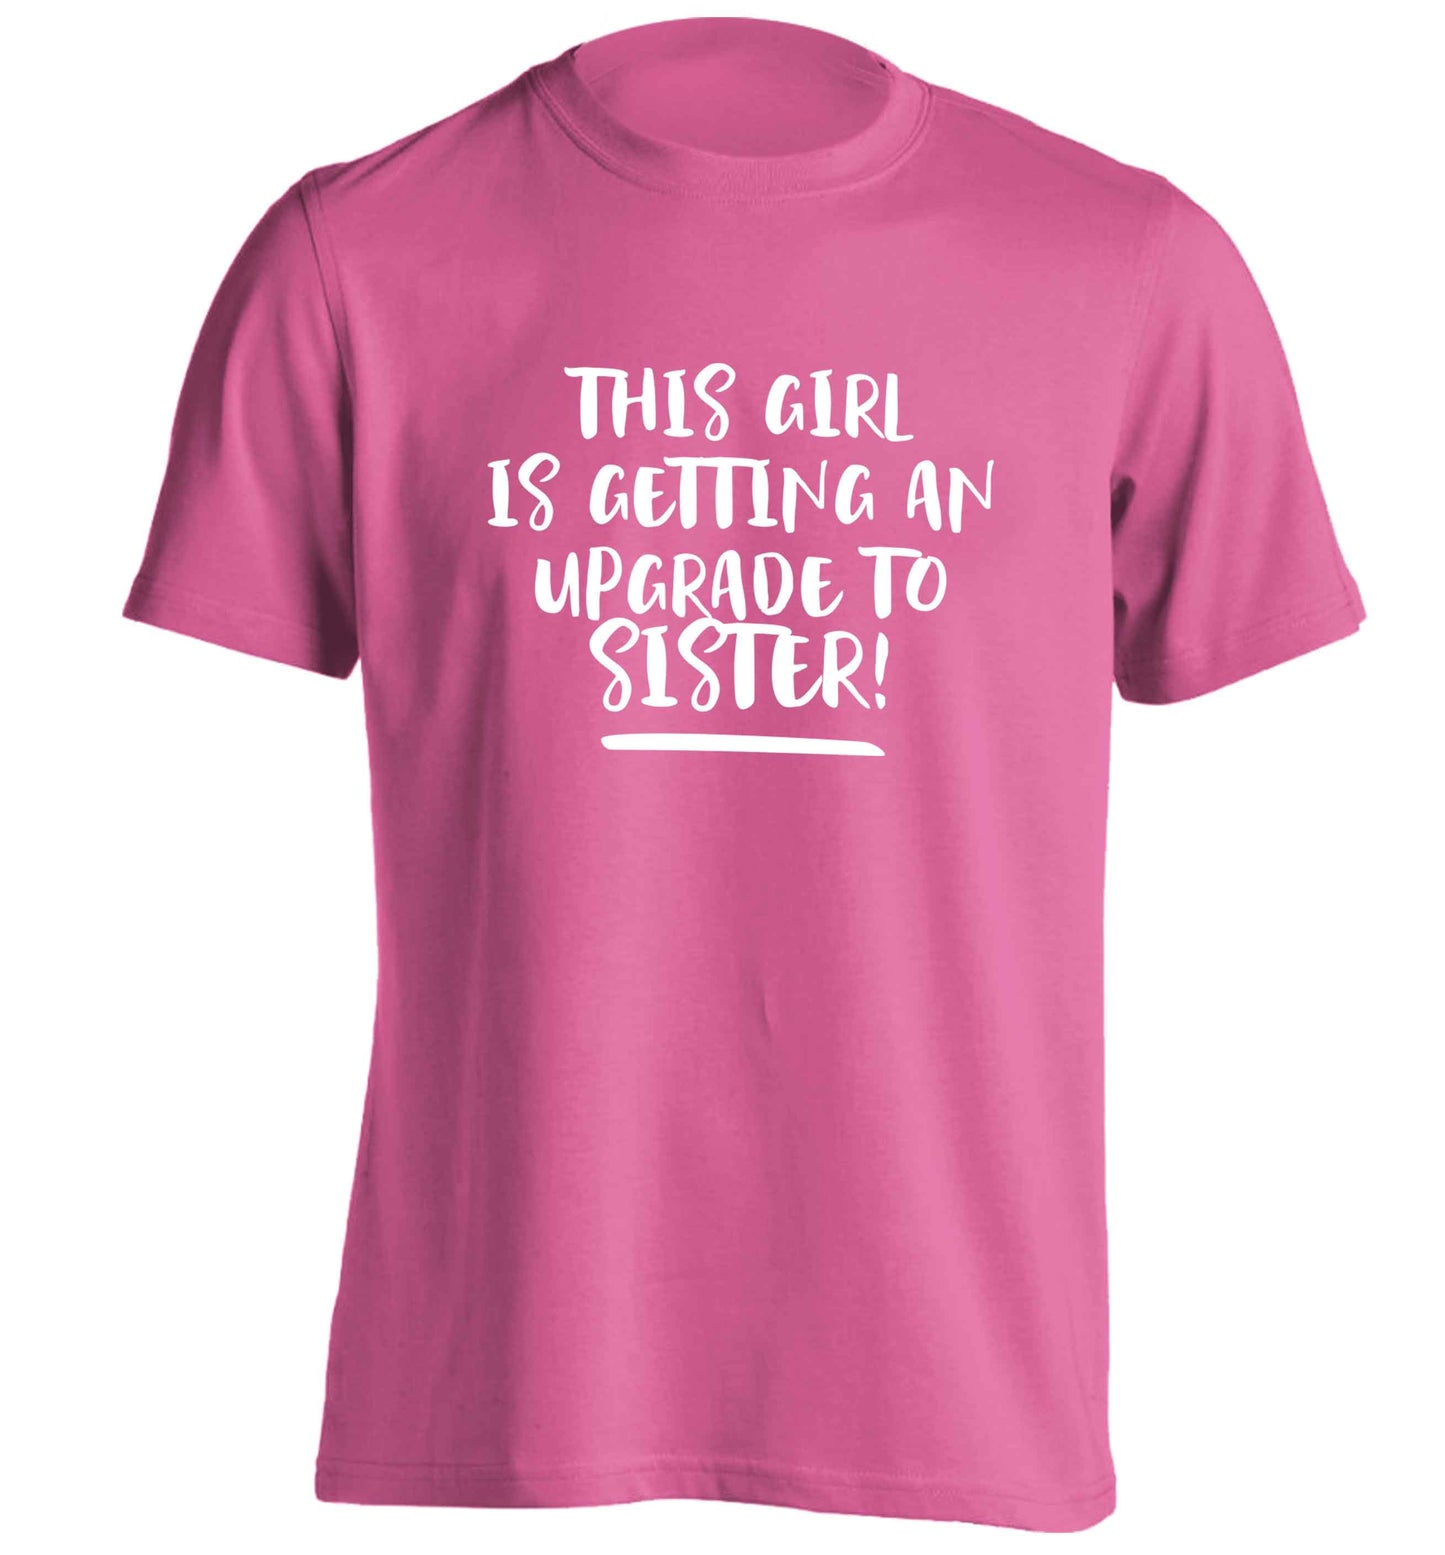 This girl is getting an upgrade to sister! adults unisex pink Tshirt 2XL